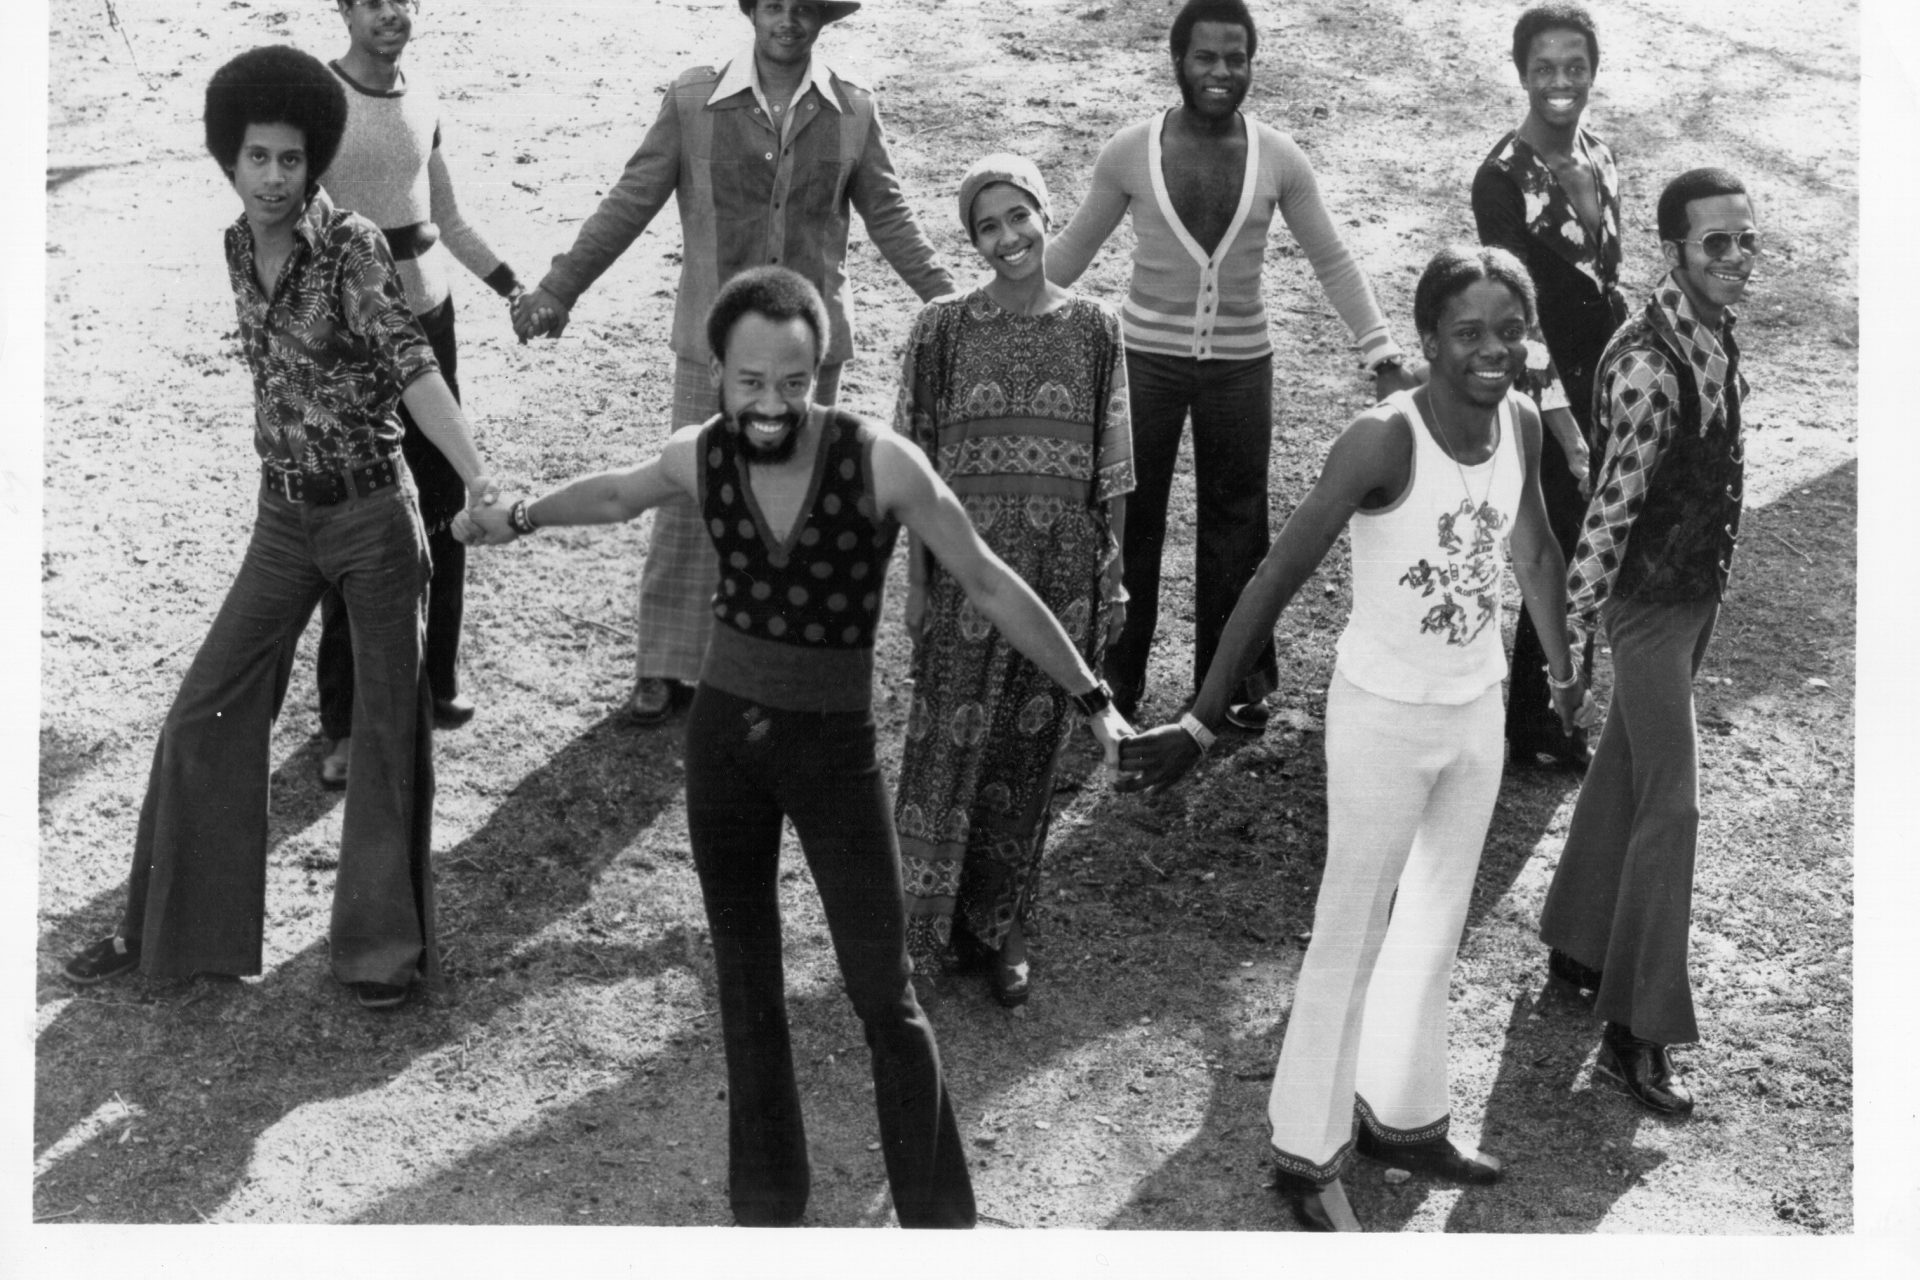 Earth, Wind & Fire and The O'Jays